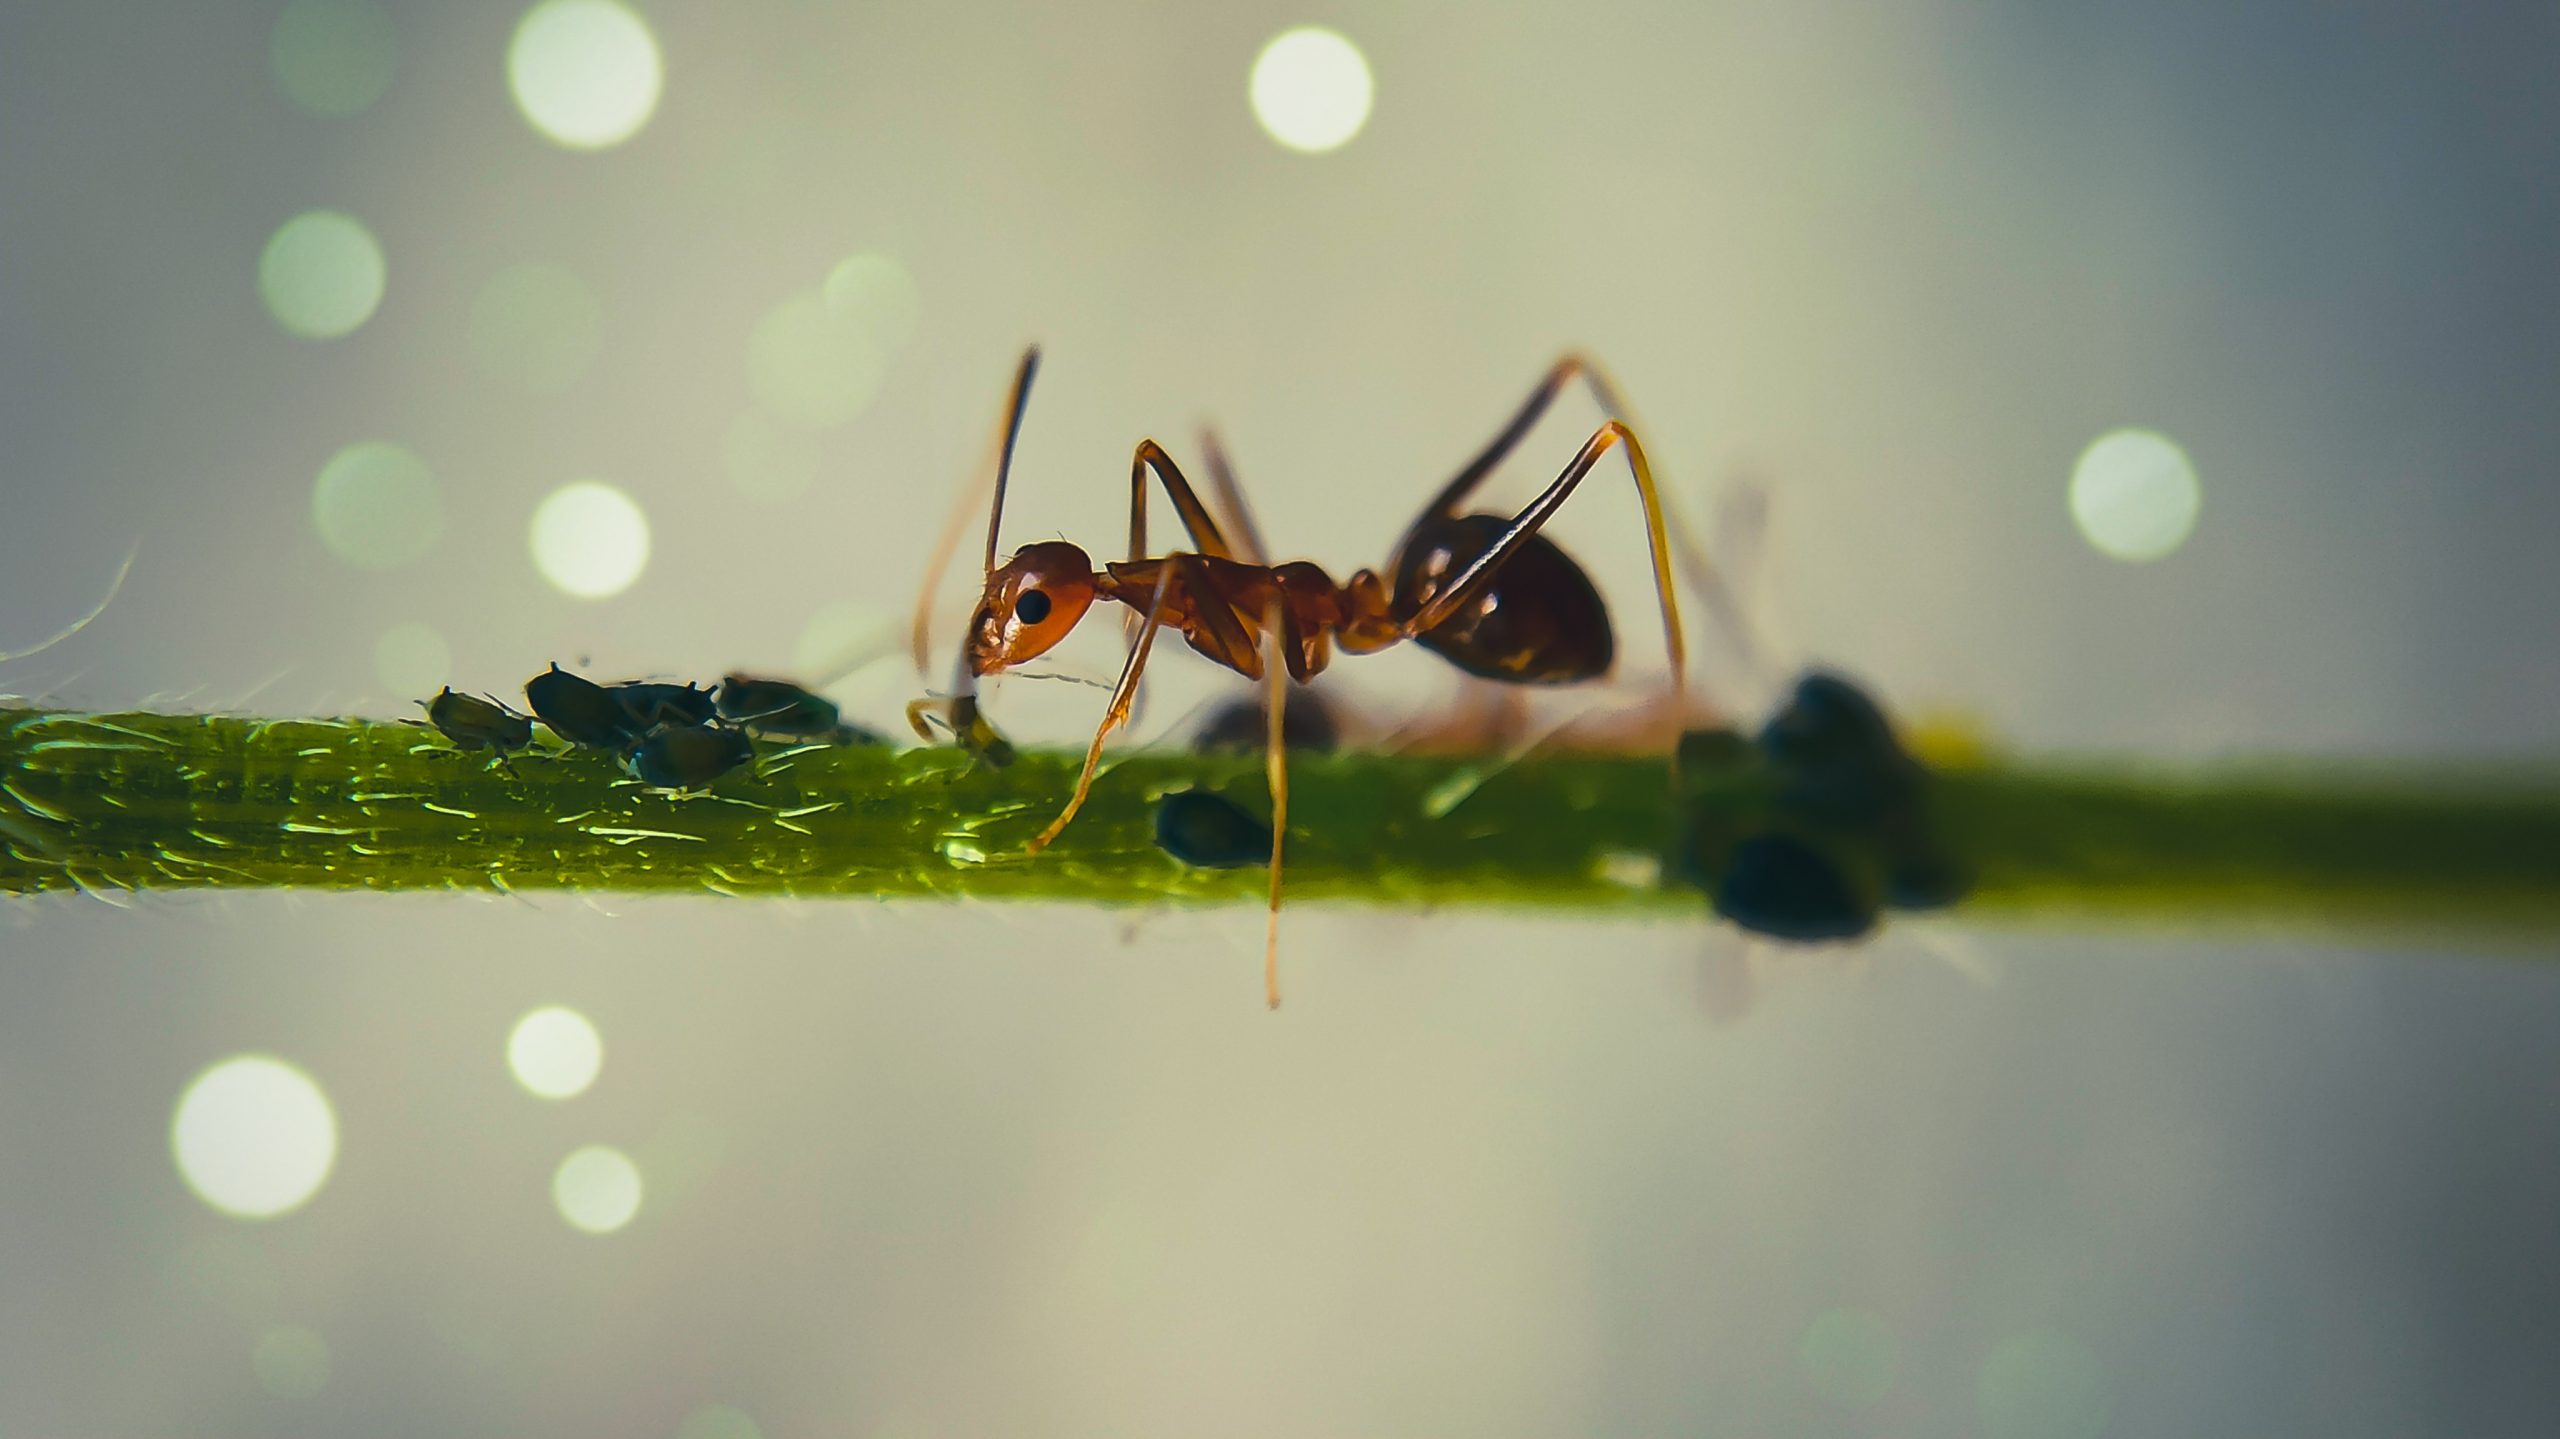 Big ant on a branch